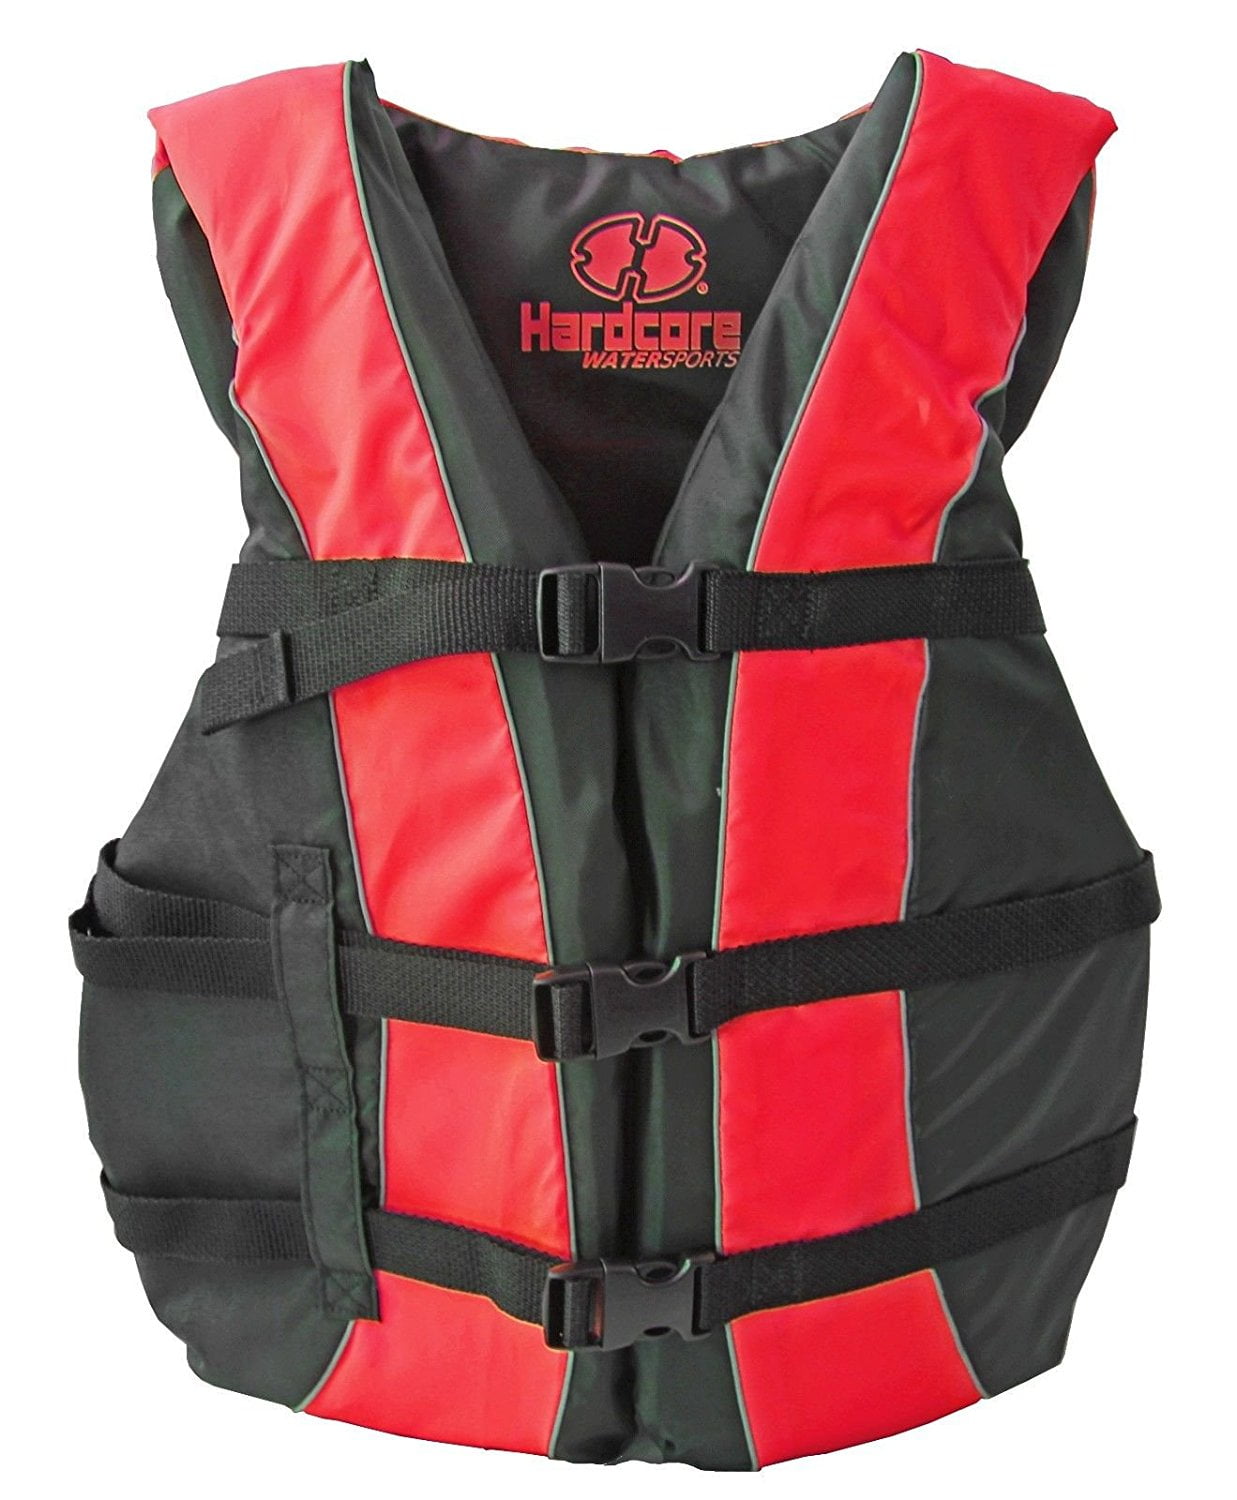 BUOYANCY AID EXTRA LARGE KAYAK 50N JACKET WITH WHISTLE SAME DAY POSTAGE